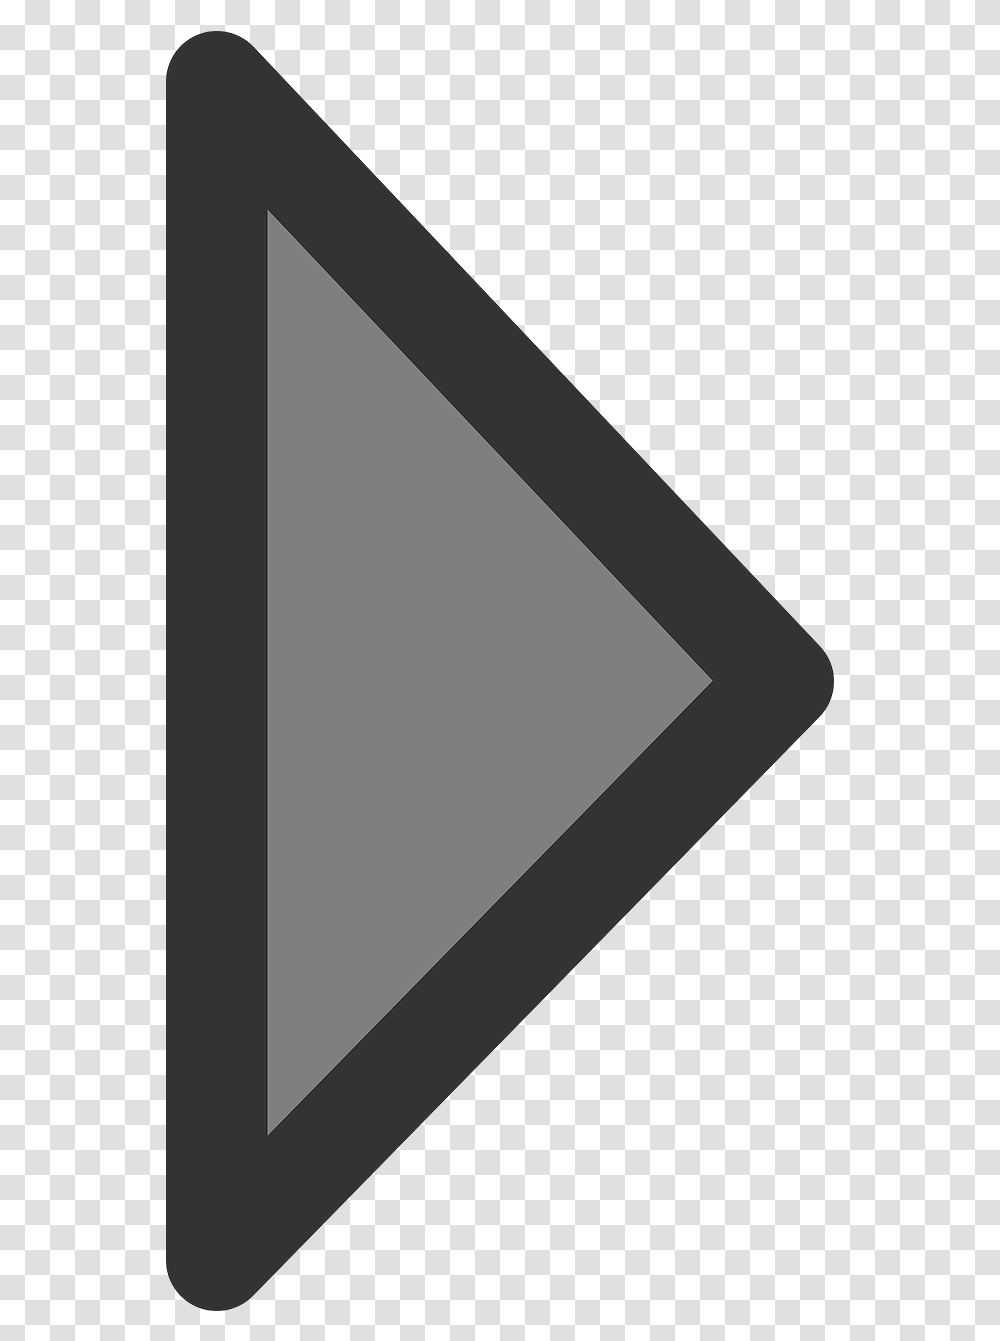 Right Arrow Sign Free Vector Graphic On Pixabay Symbols Right Arrow, Triangle, Electronics, Gray, Art Transparent Png